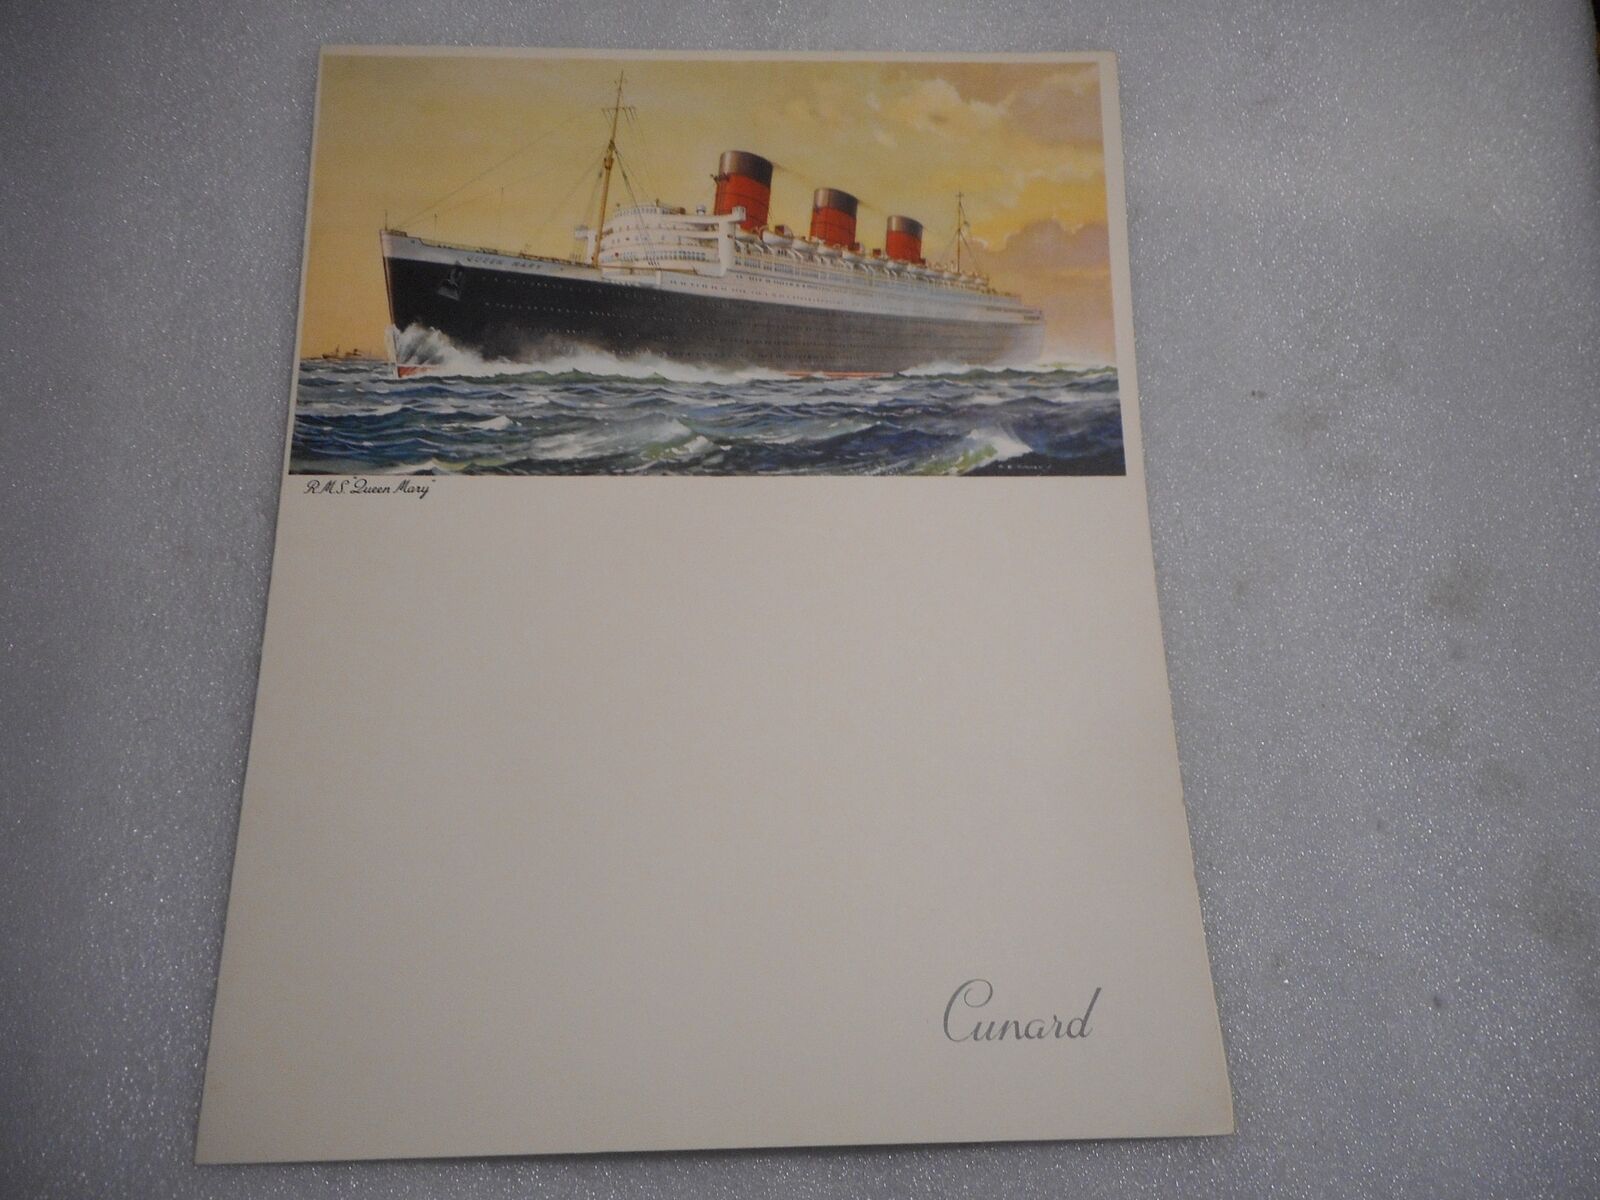 Vintage July 6 1957 Cunard RMS Queen Mary Steampship Gala Dinner Menu